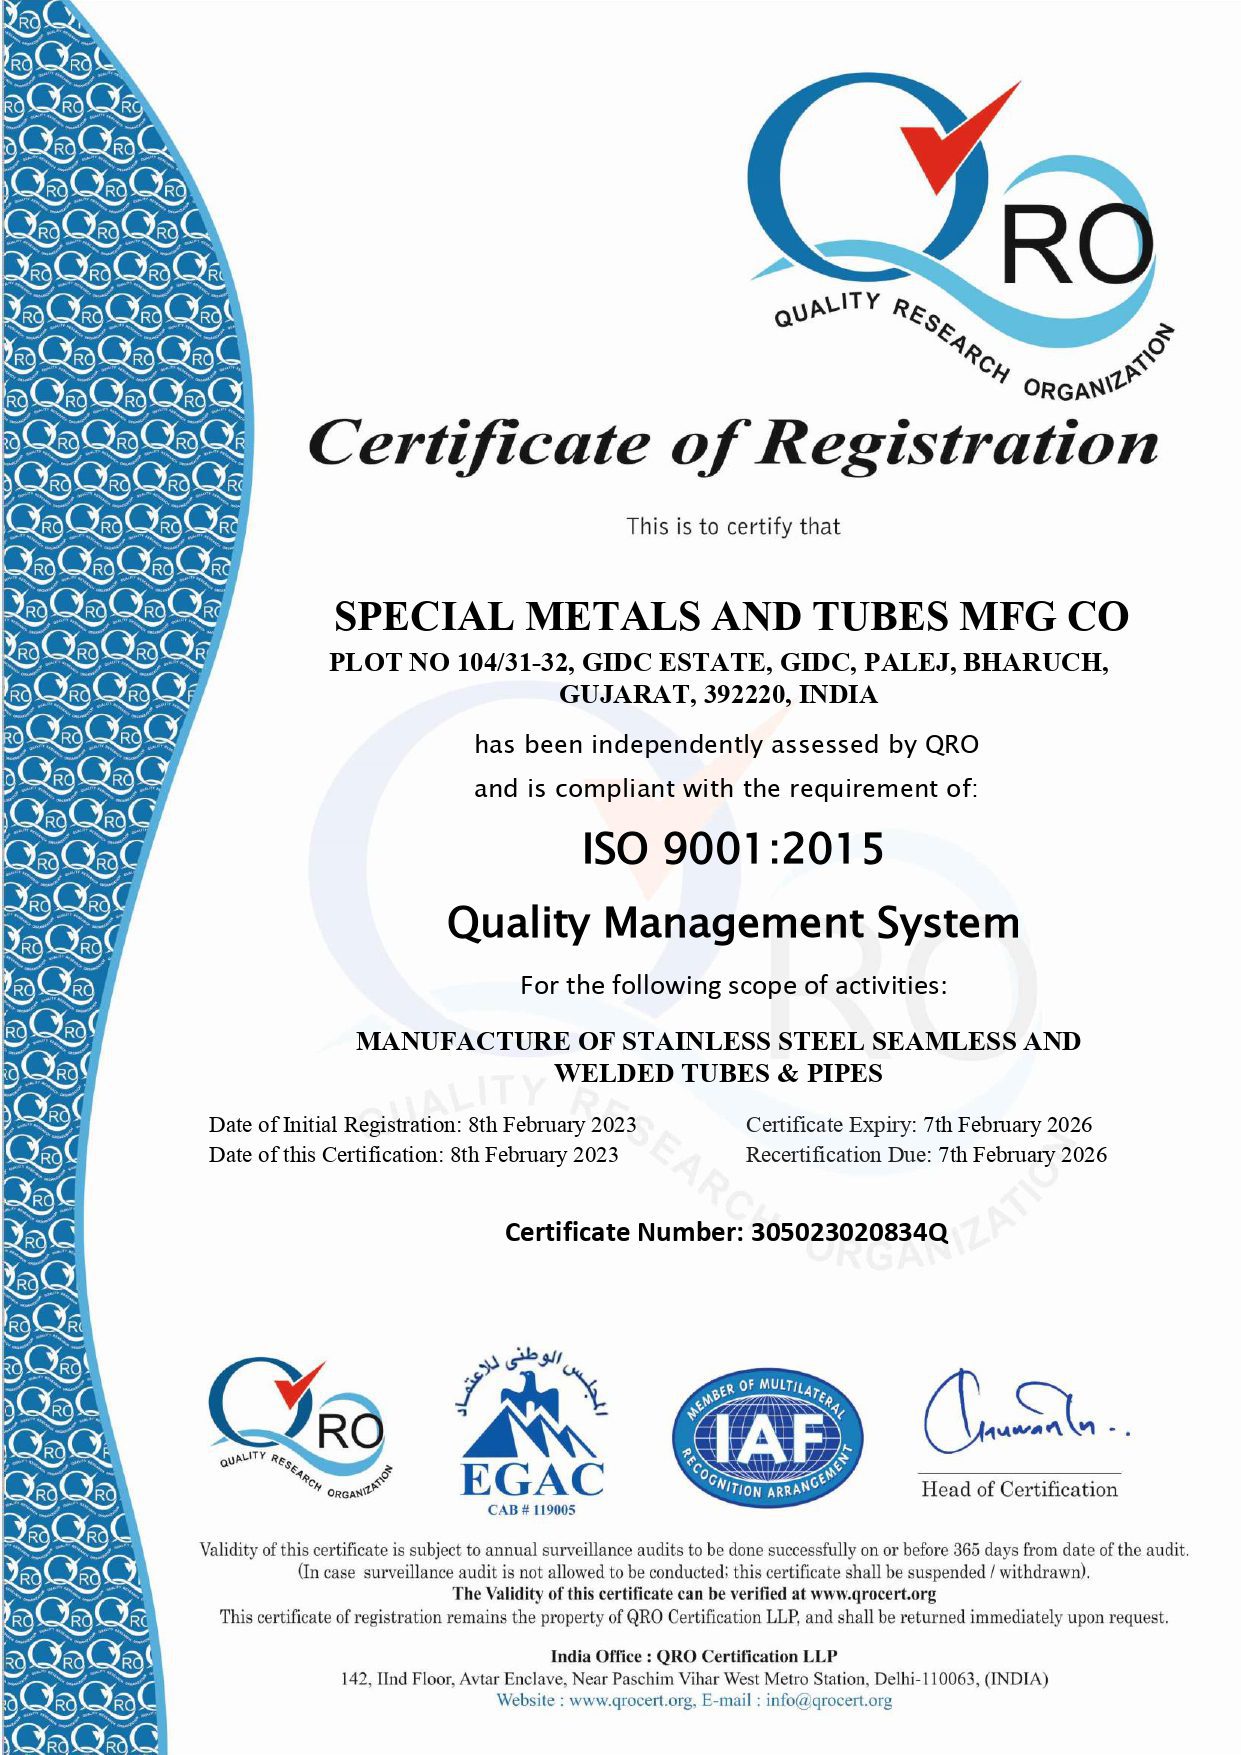 SPECIAL METALS AND TUBES MFG-CO-iso-9001-2015